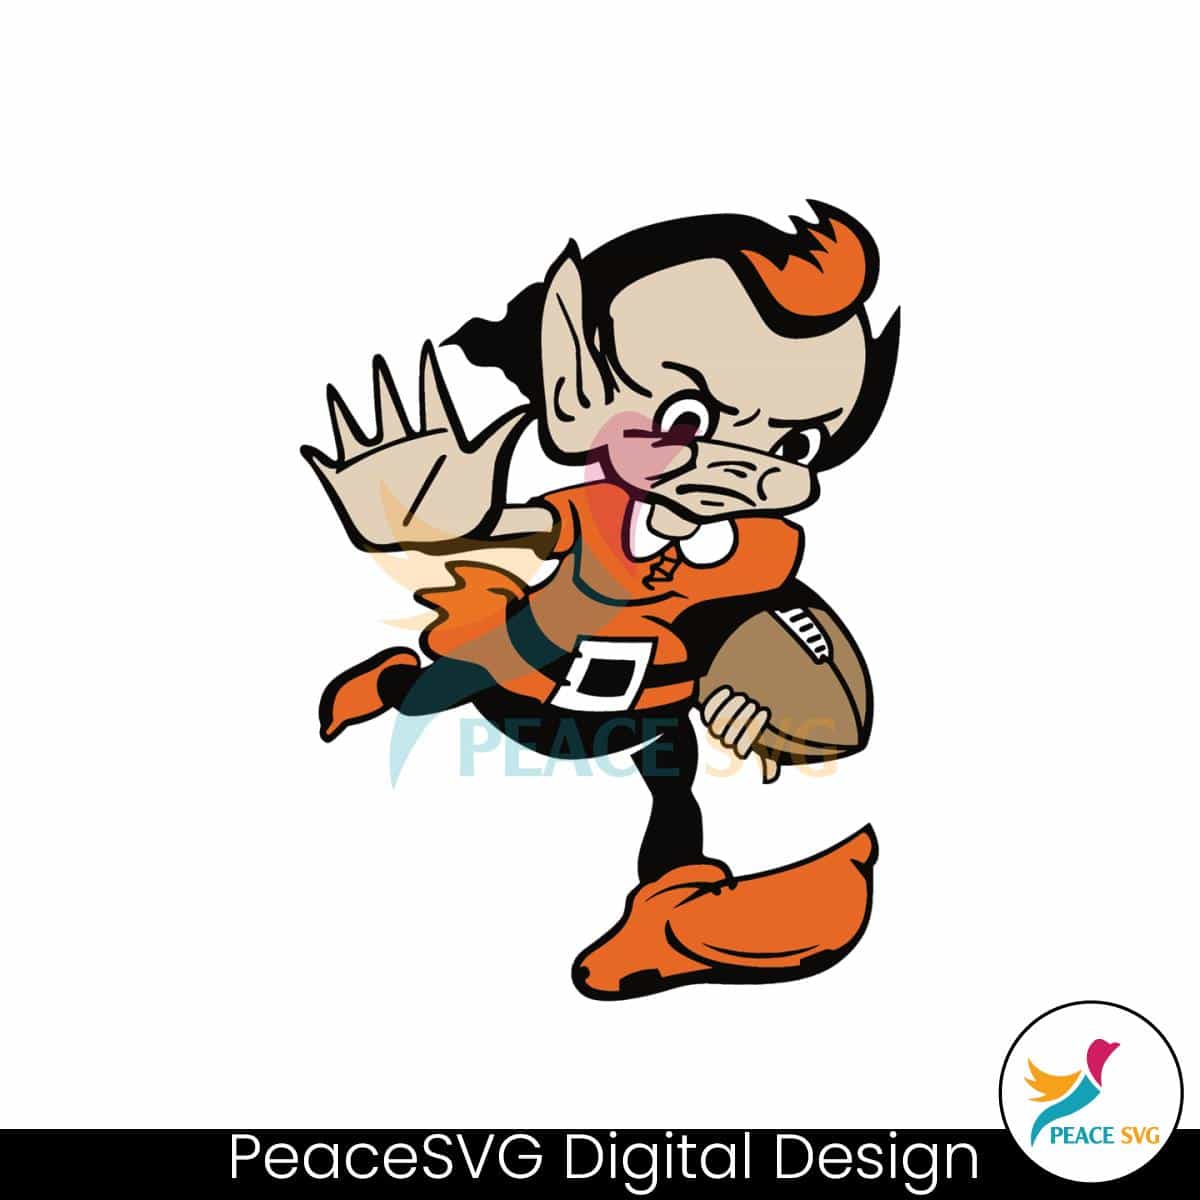 Brownie the Elf Cleveland Browns Mascot SVG » PeaceSVG